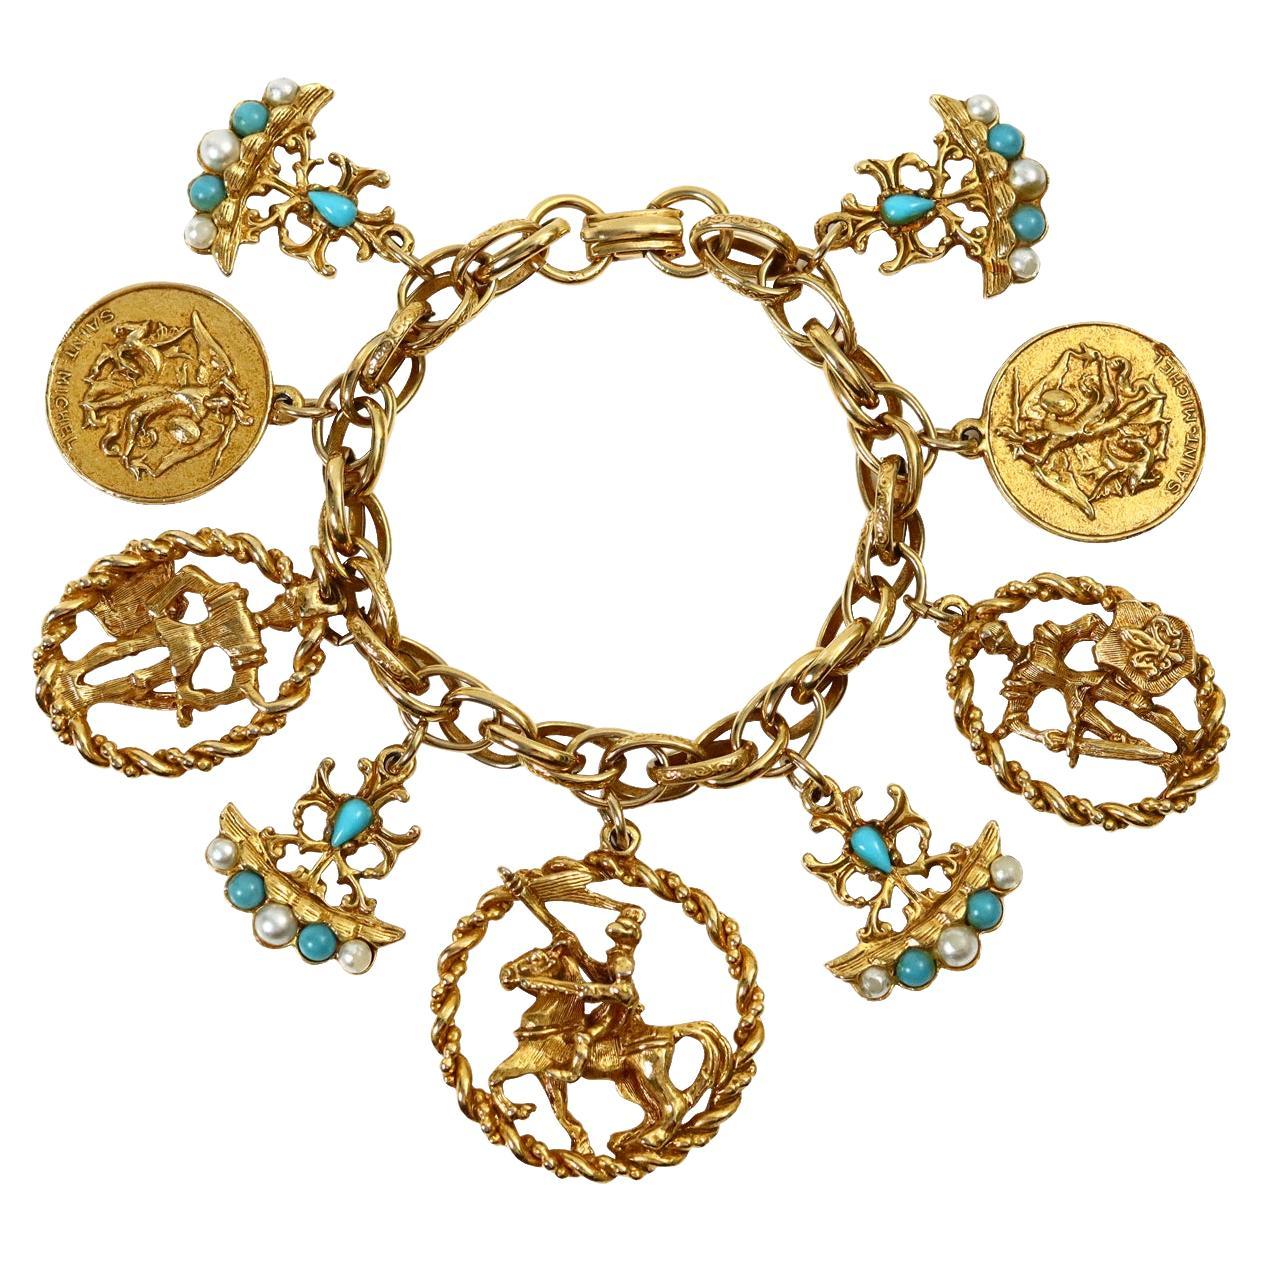 Vintage Gold and Faux Turquoise Charm Bracelet, circa 1980s